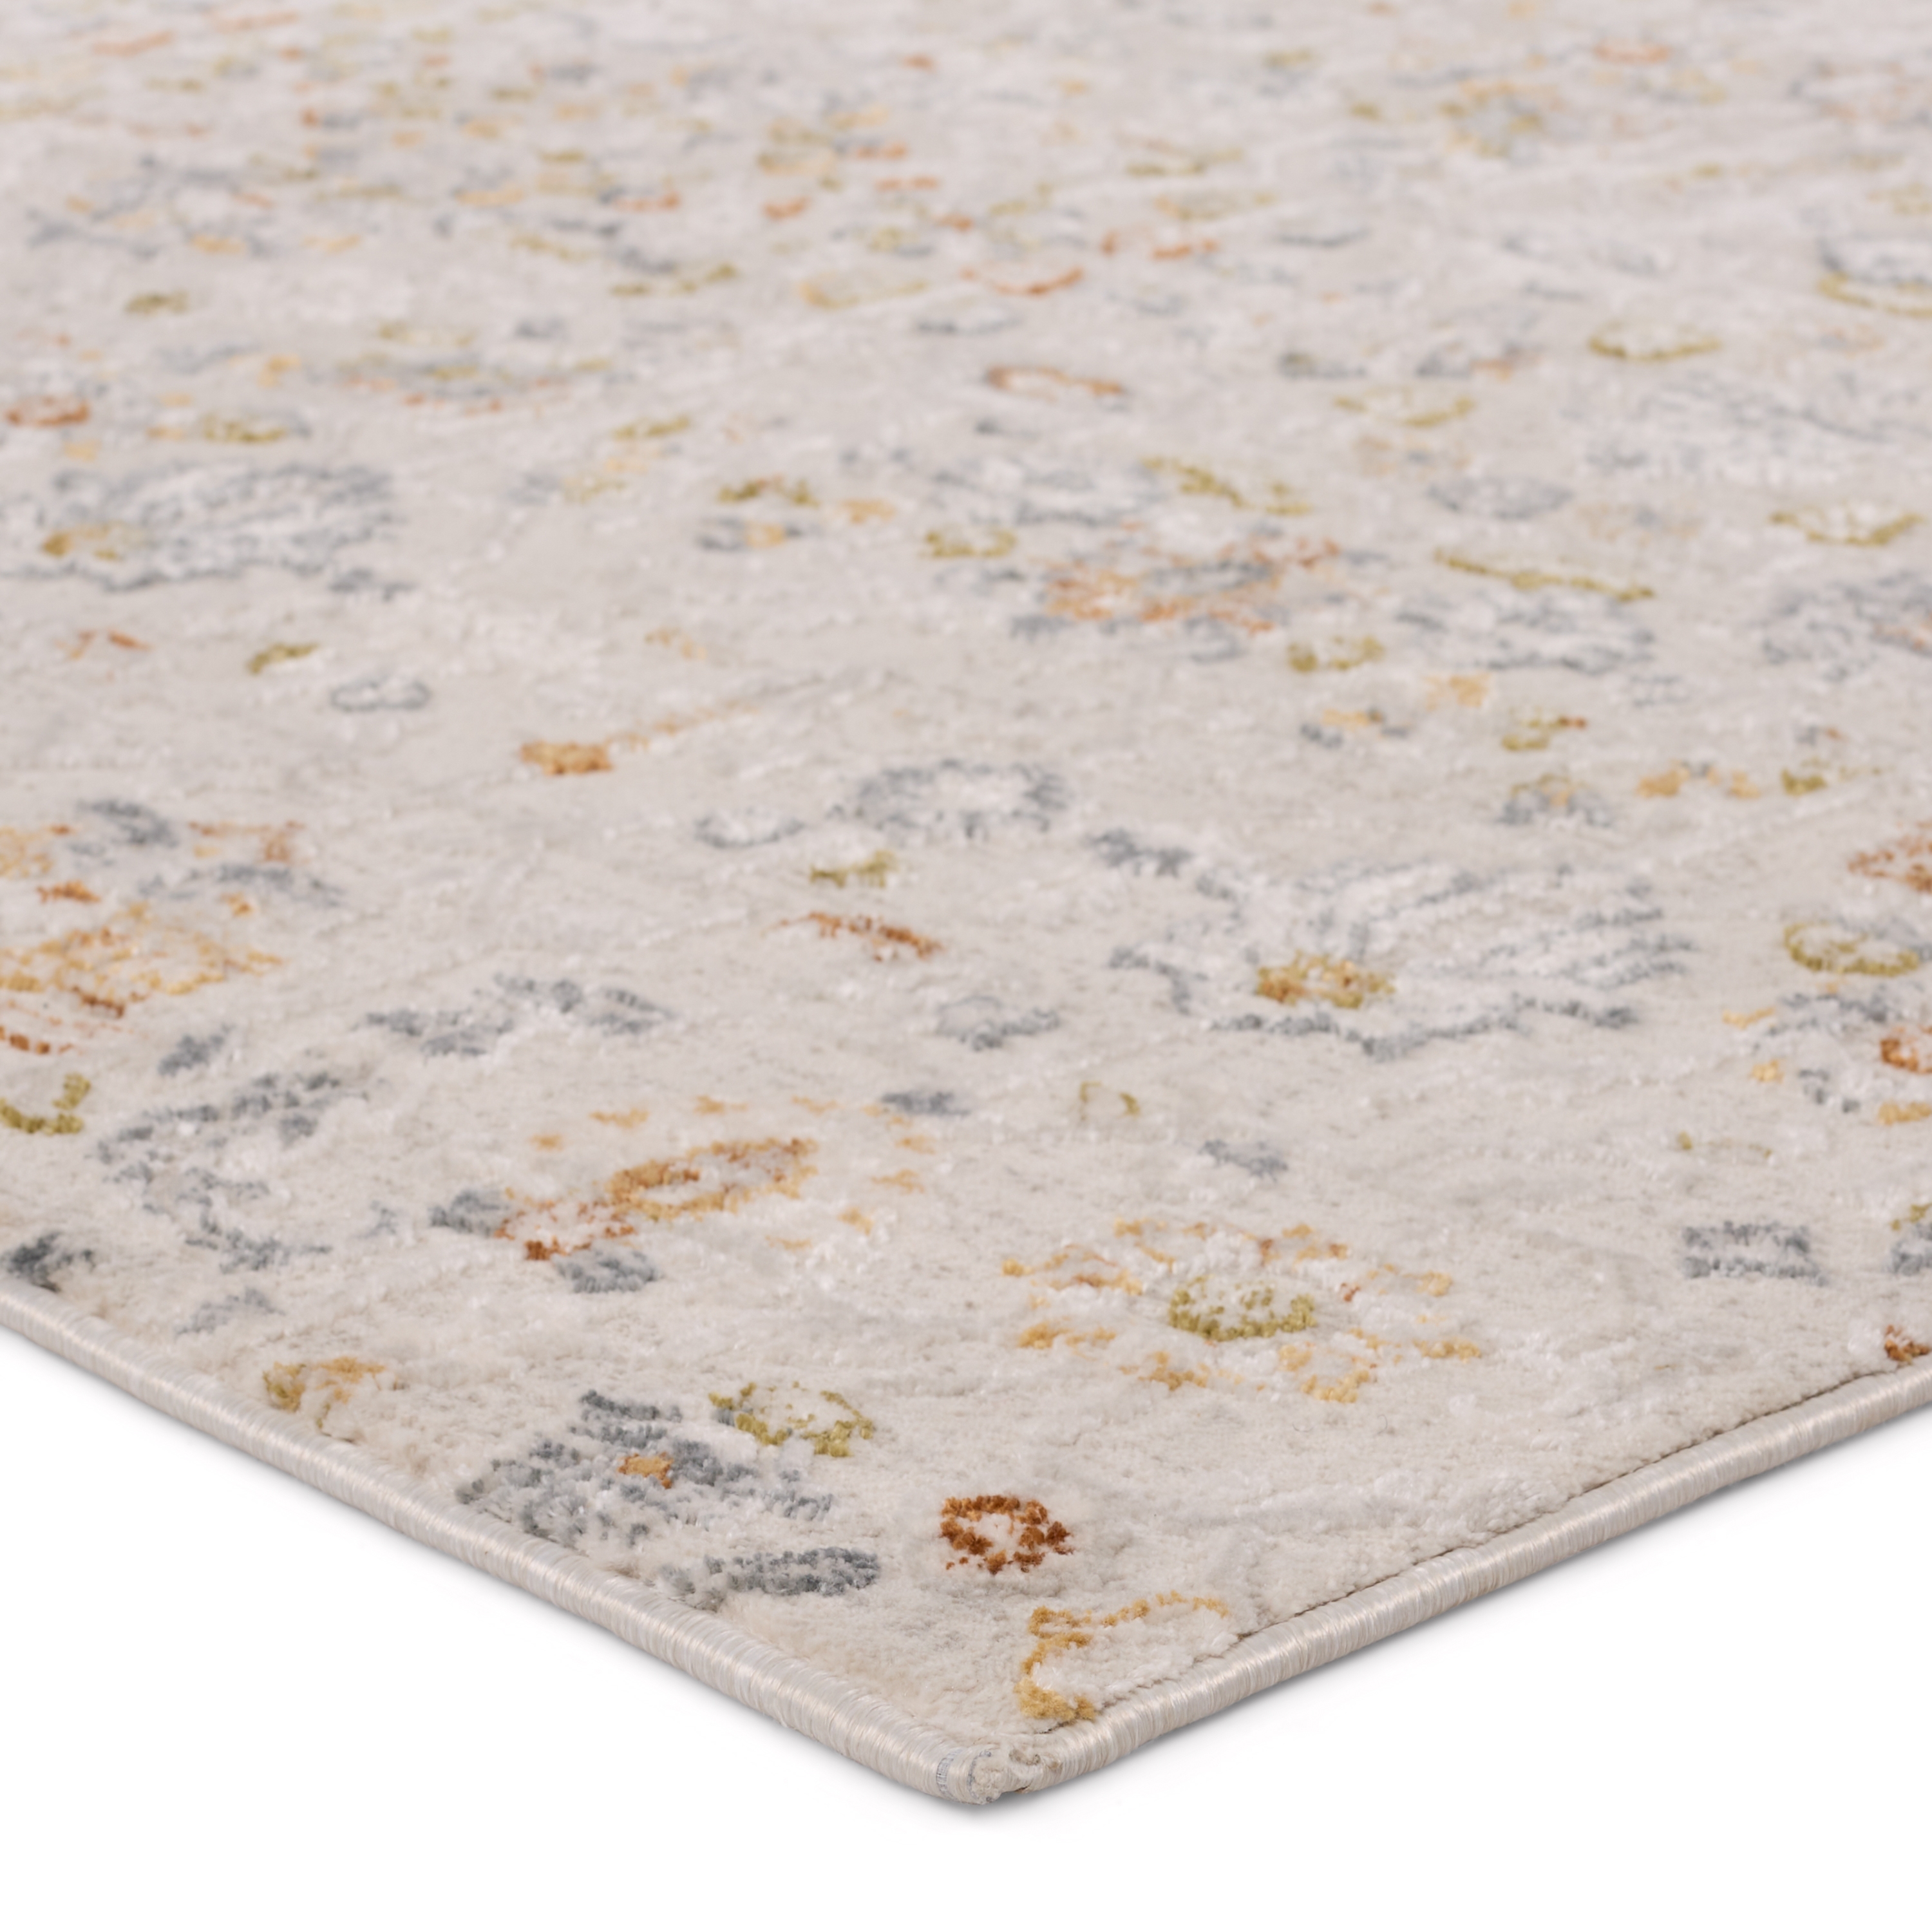 Waverly Floral White/ Light Gray Area Rug (10'2"X14') - Image 1